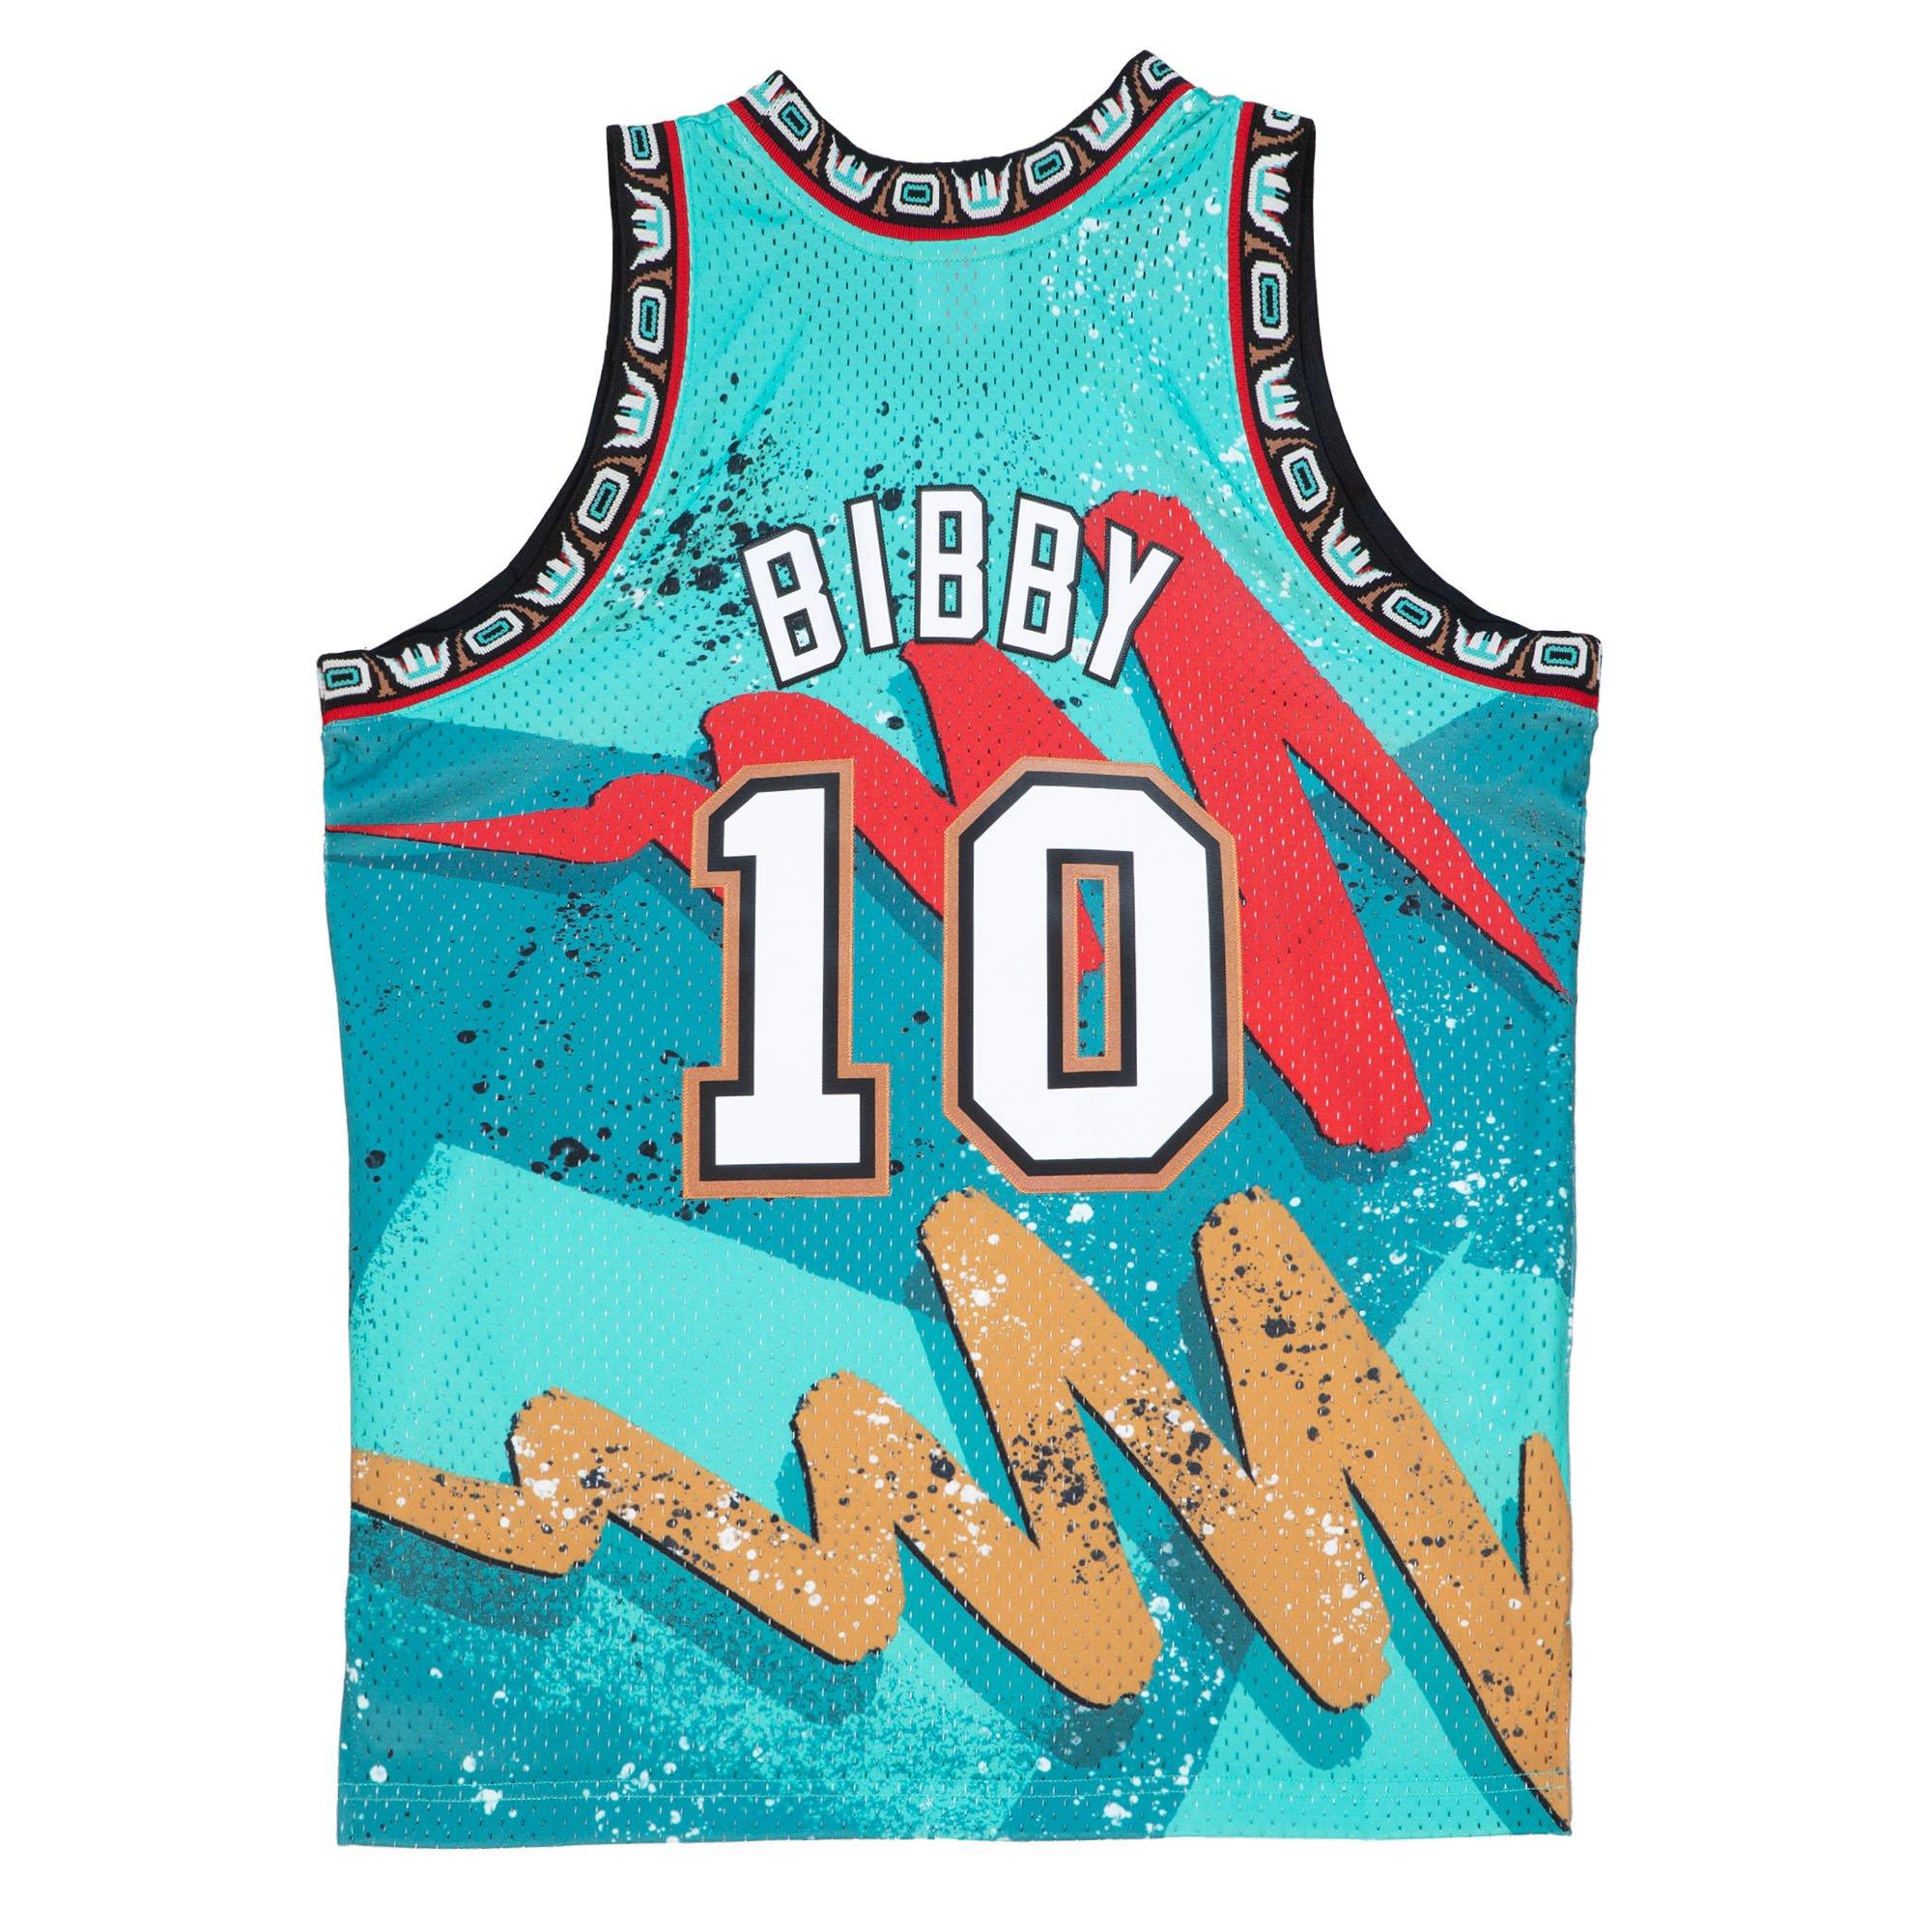 MIKE BIBBY VANCOUVER GRIZZLIES Spell-out Champion Jersey Men Black 48 XL NEW